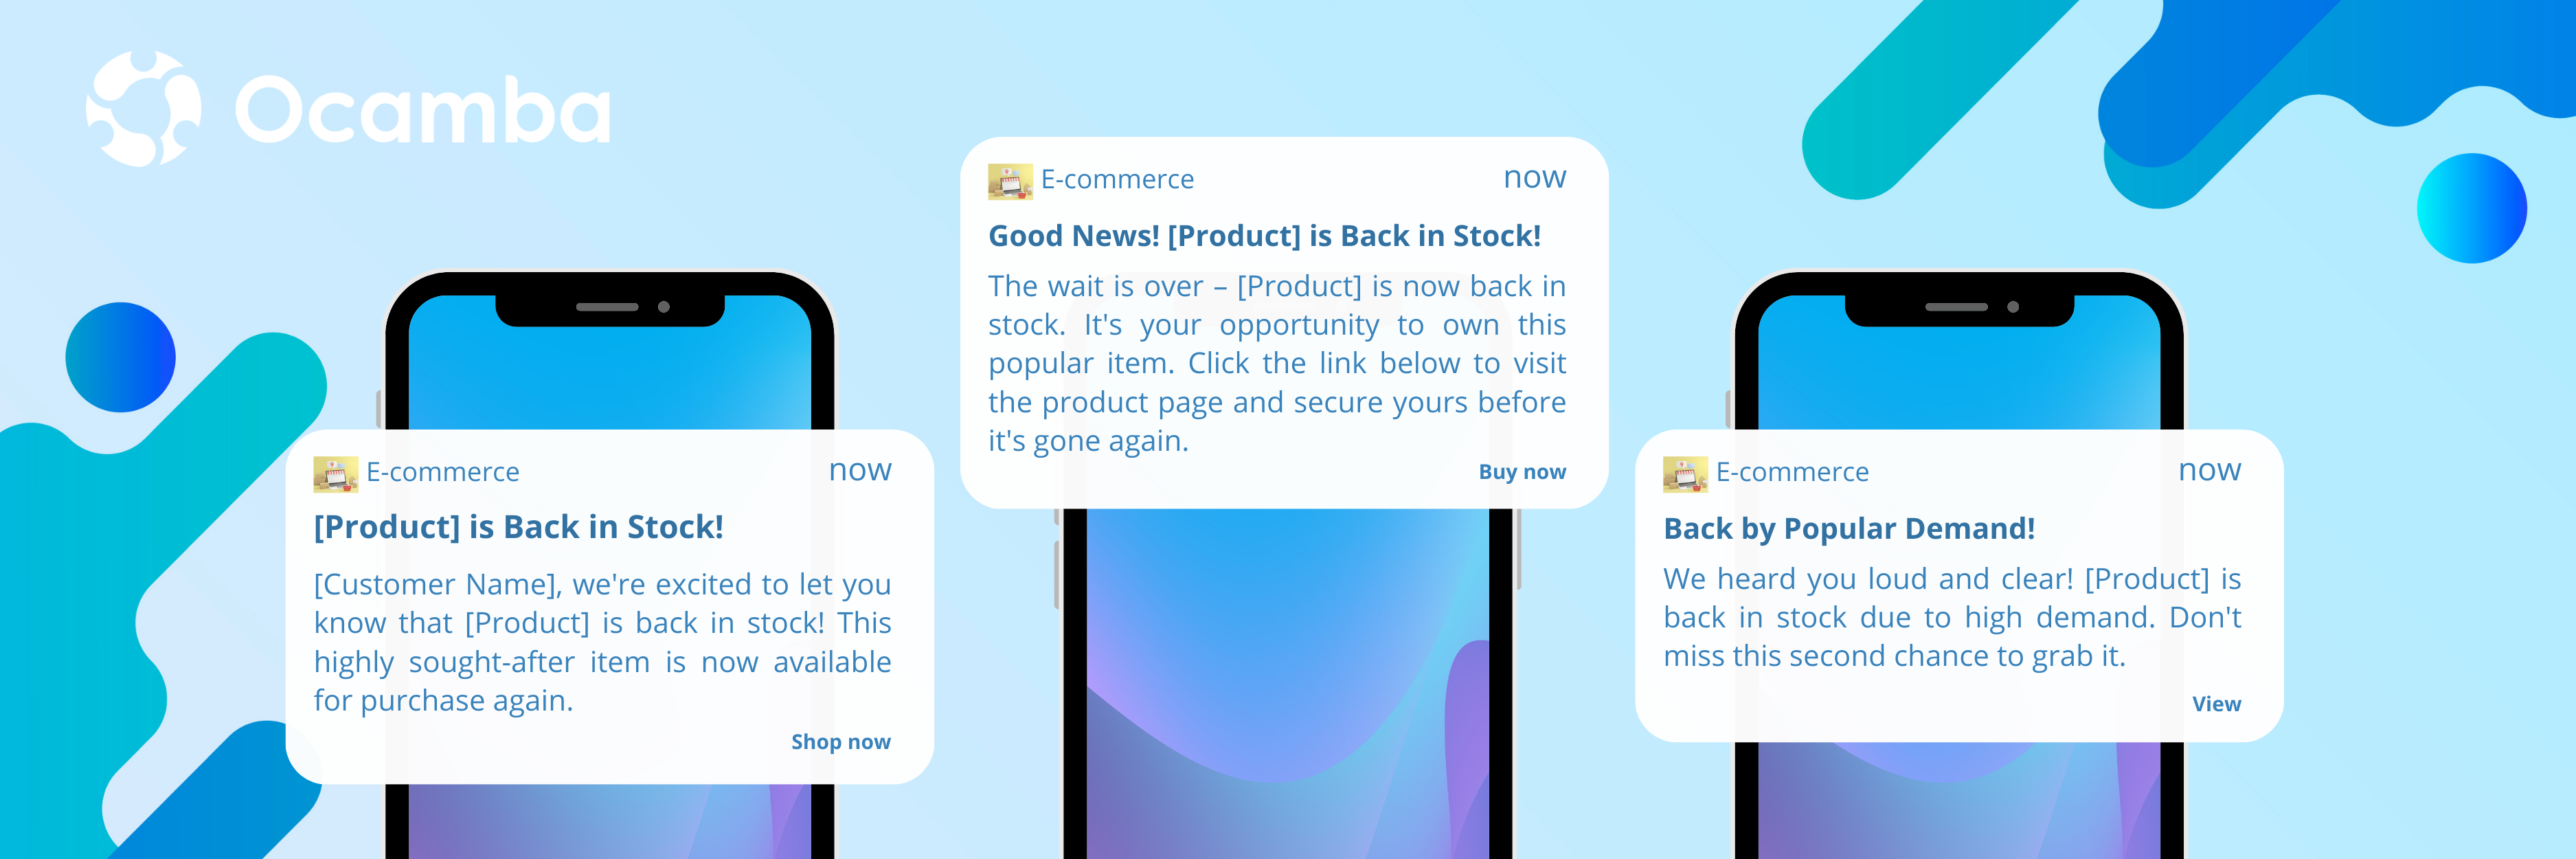 Ecommerce push notifications templates for back-in-stock items